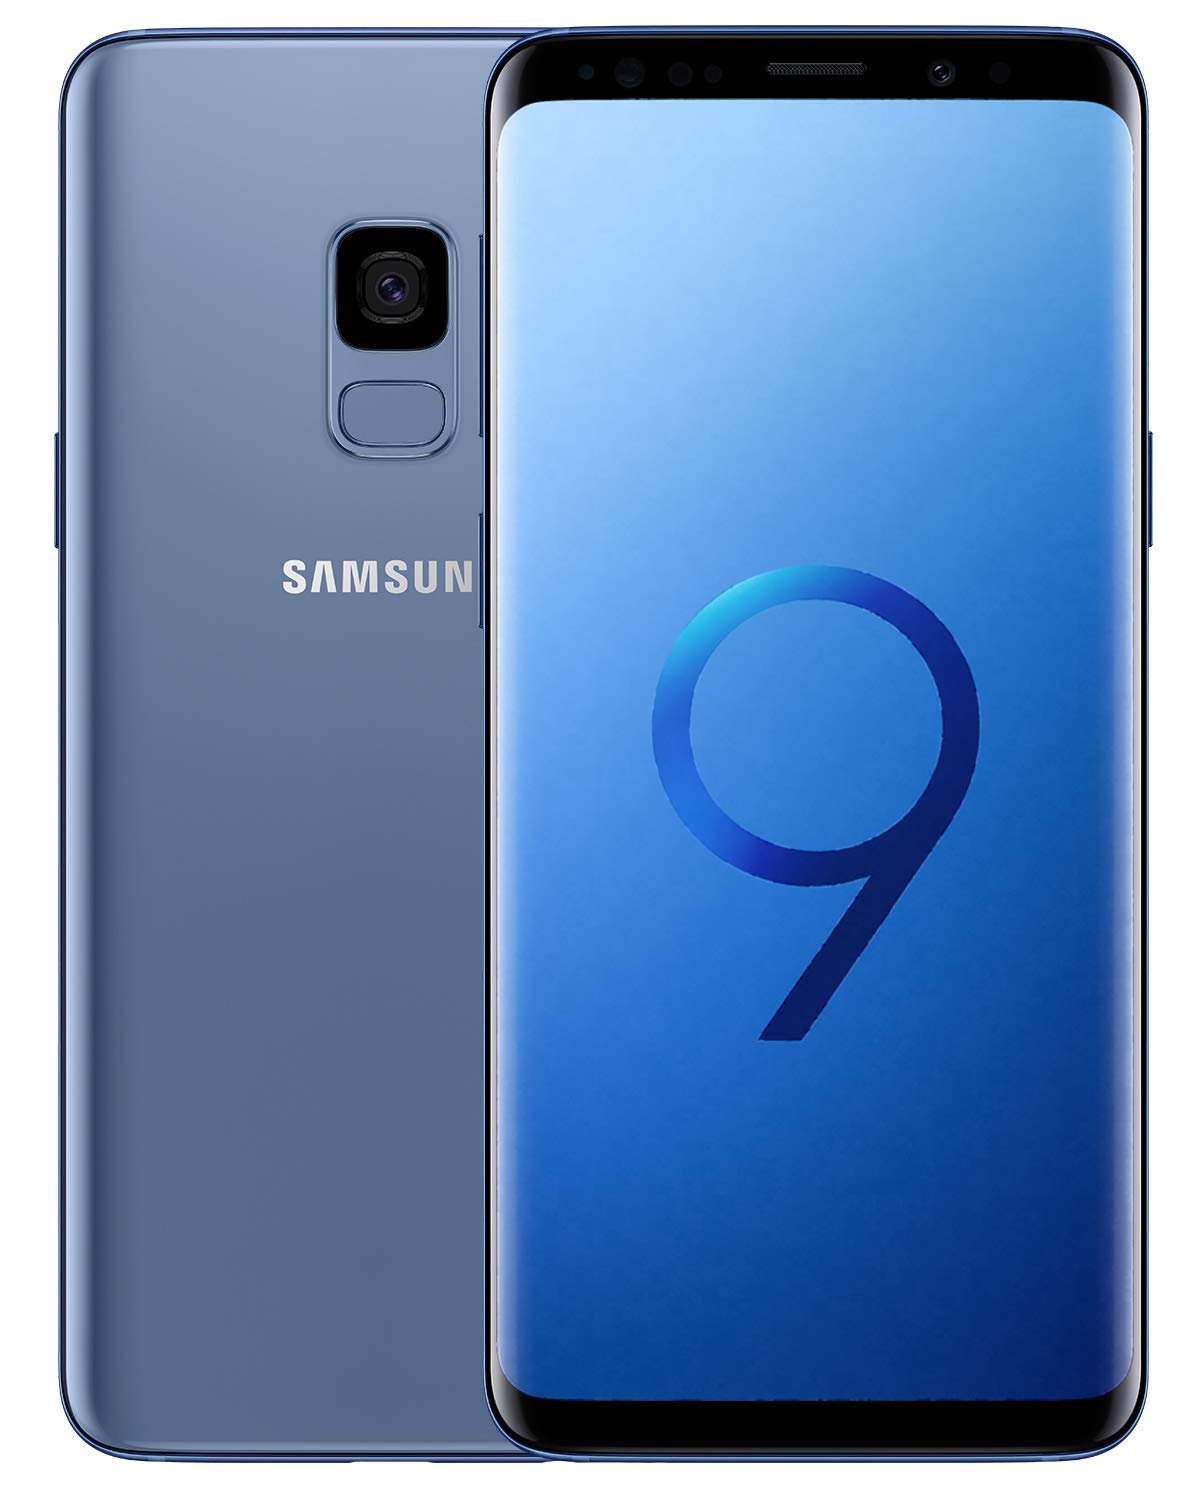 Samsung Galaxy S9/ S9+ Android 10 update